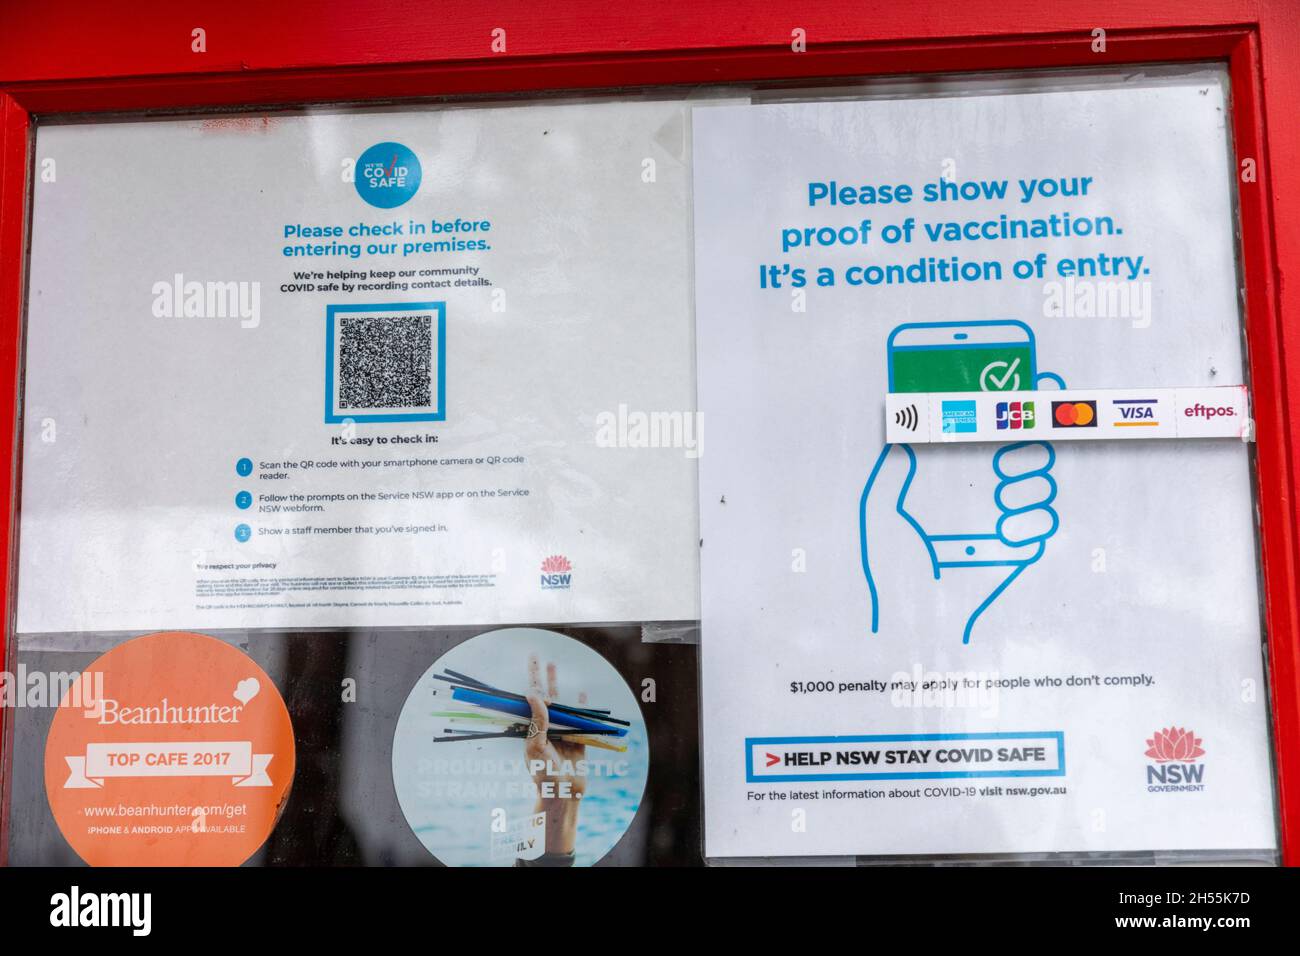 Sydney shop requires customers to show proof of double vaccination and to check in with Service NSW QR app,Australia Stock Photo